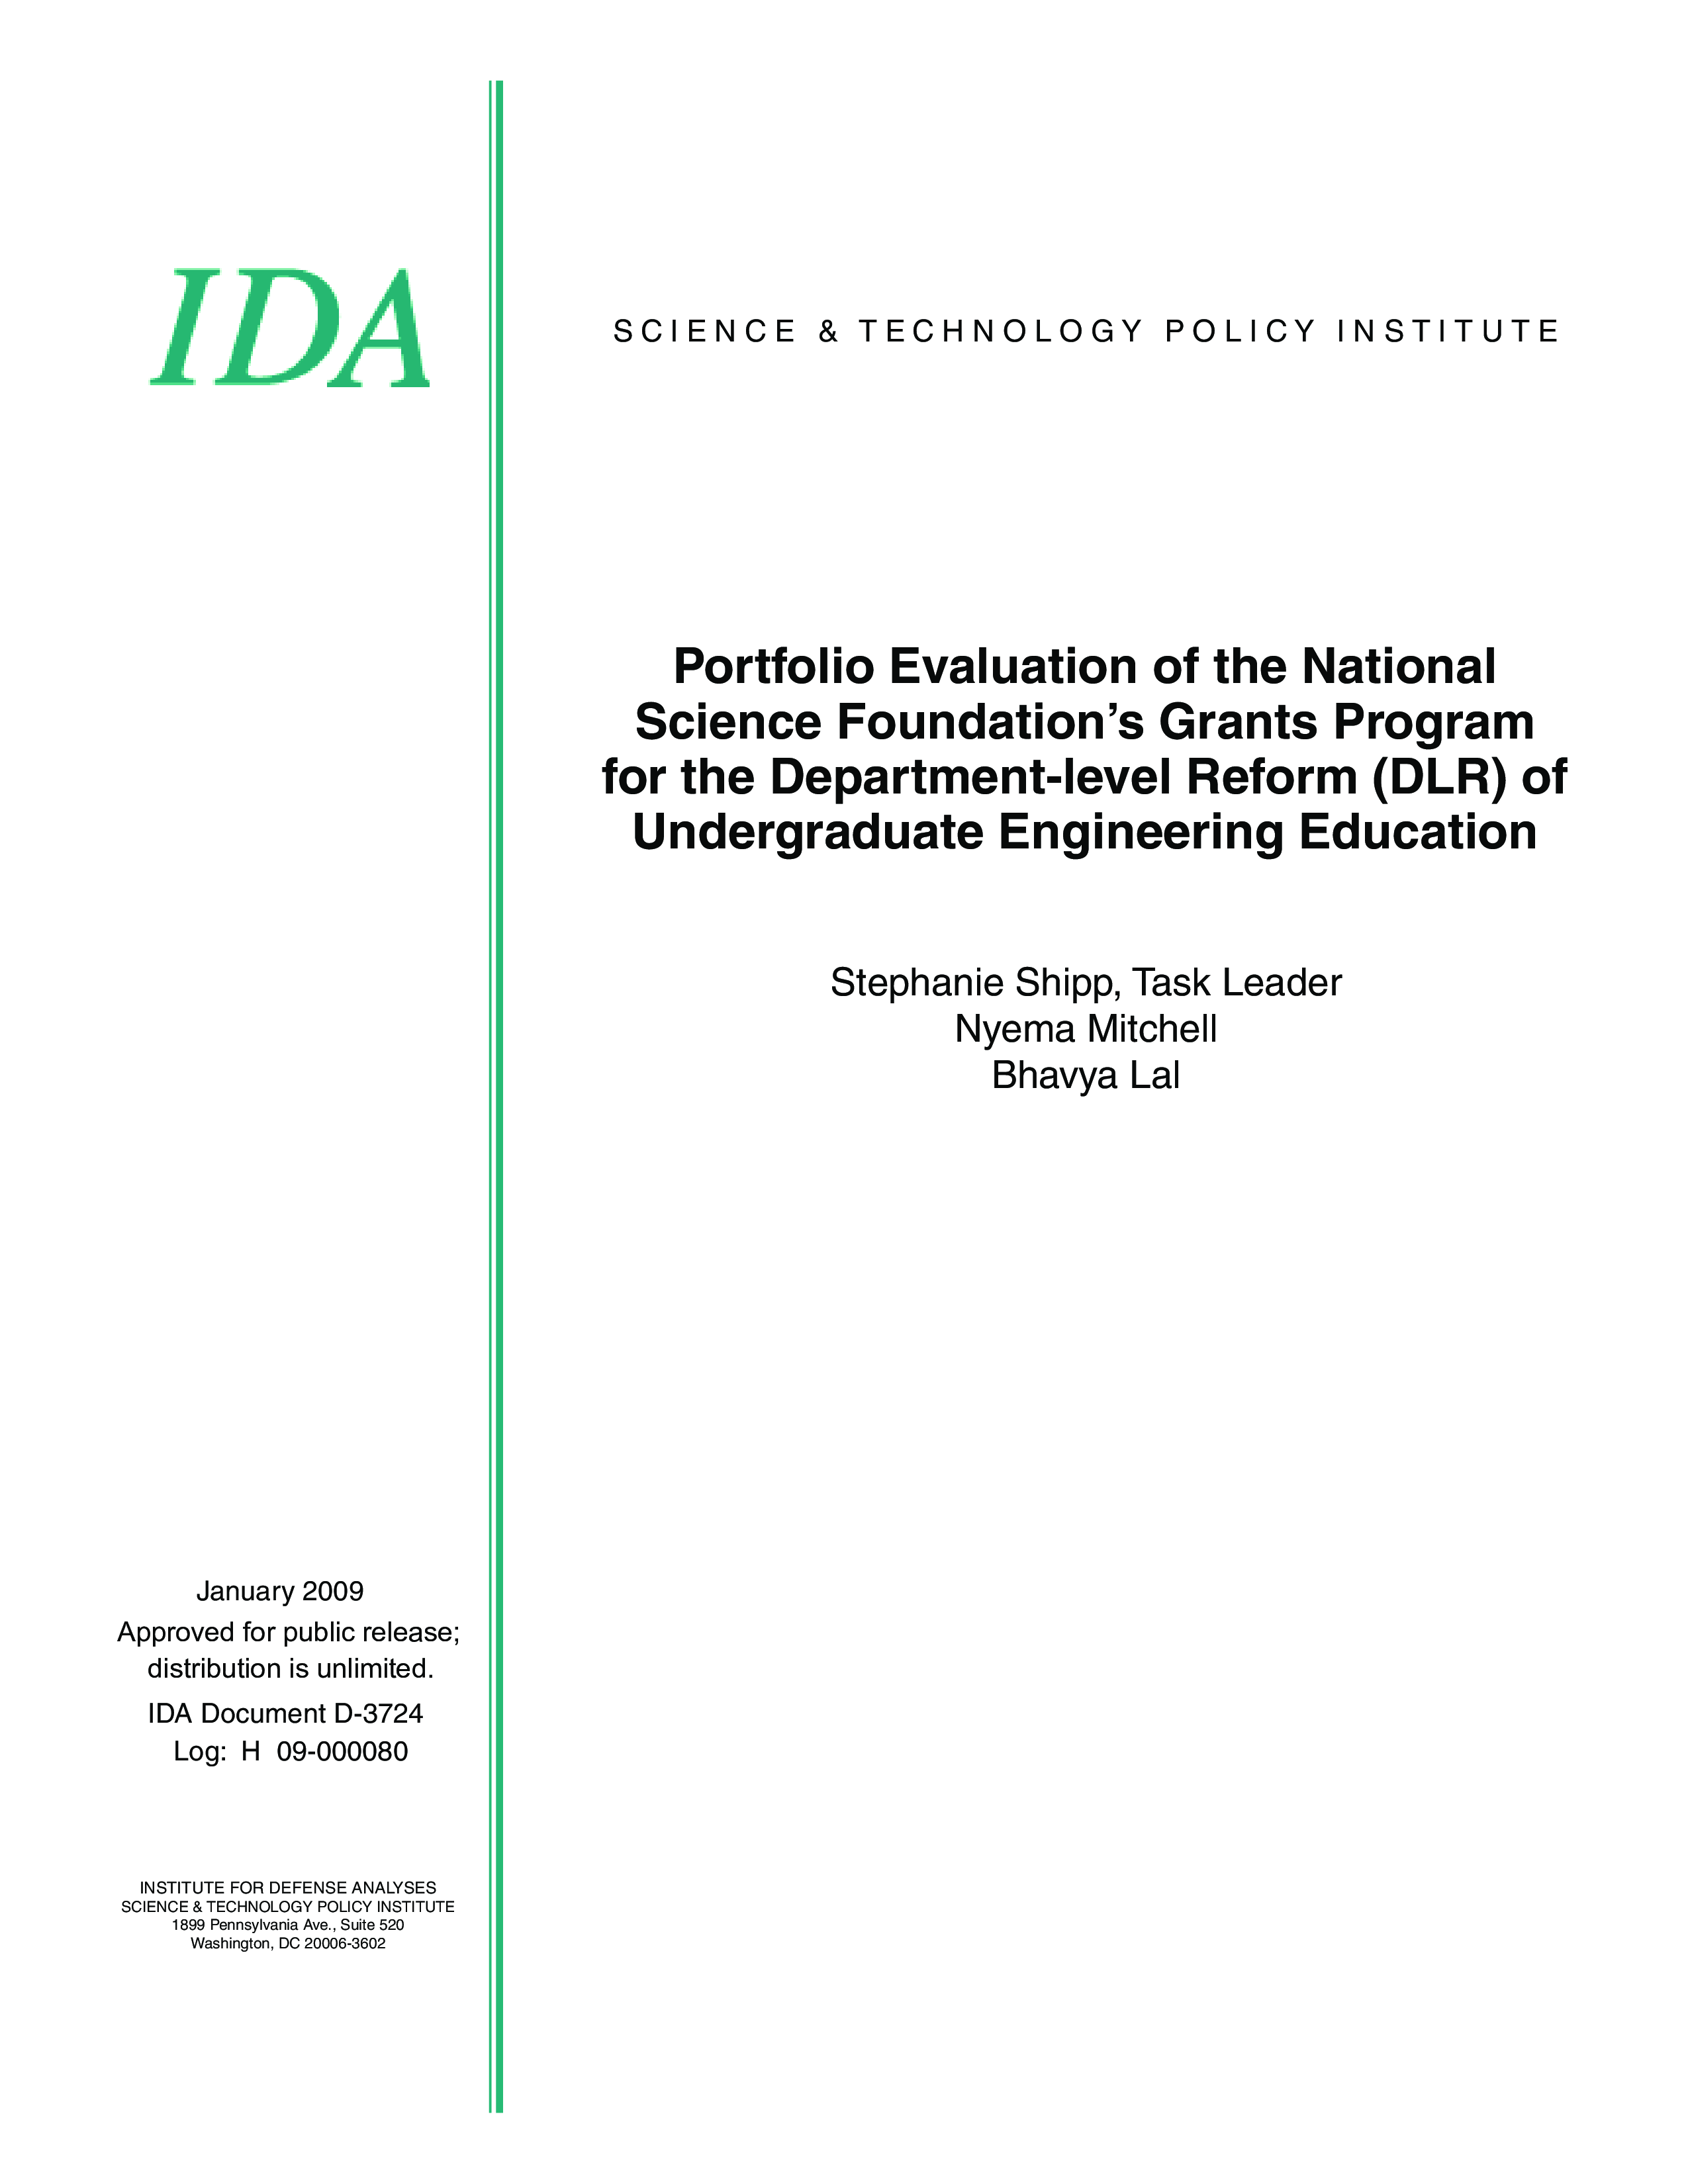 Portfolio Evaluation of the National Science Foundation’s Grants Program for the Department-level Reform (DLR) of Undergraduate Engineering Education